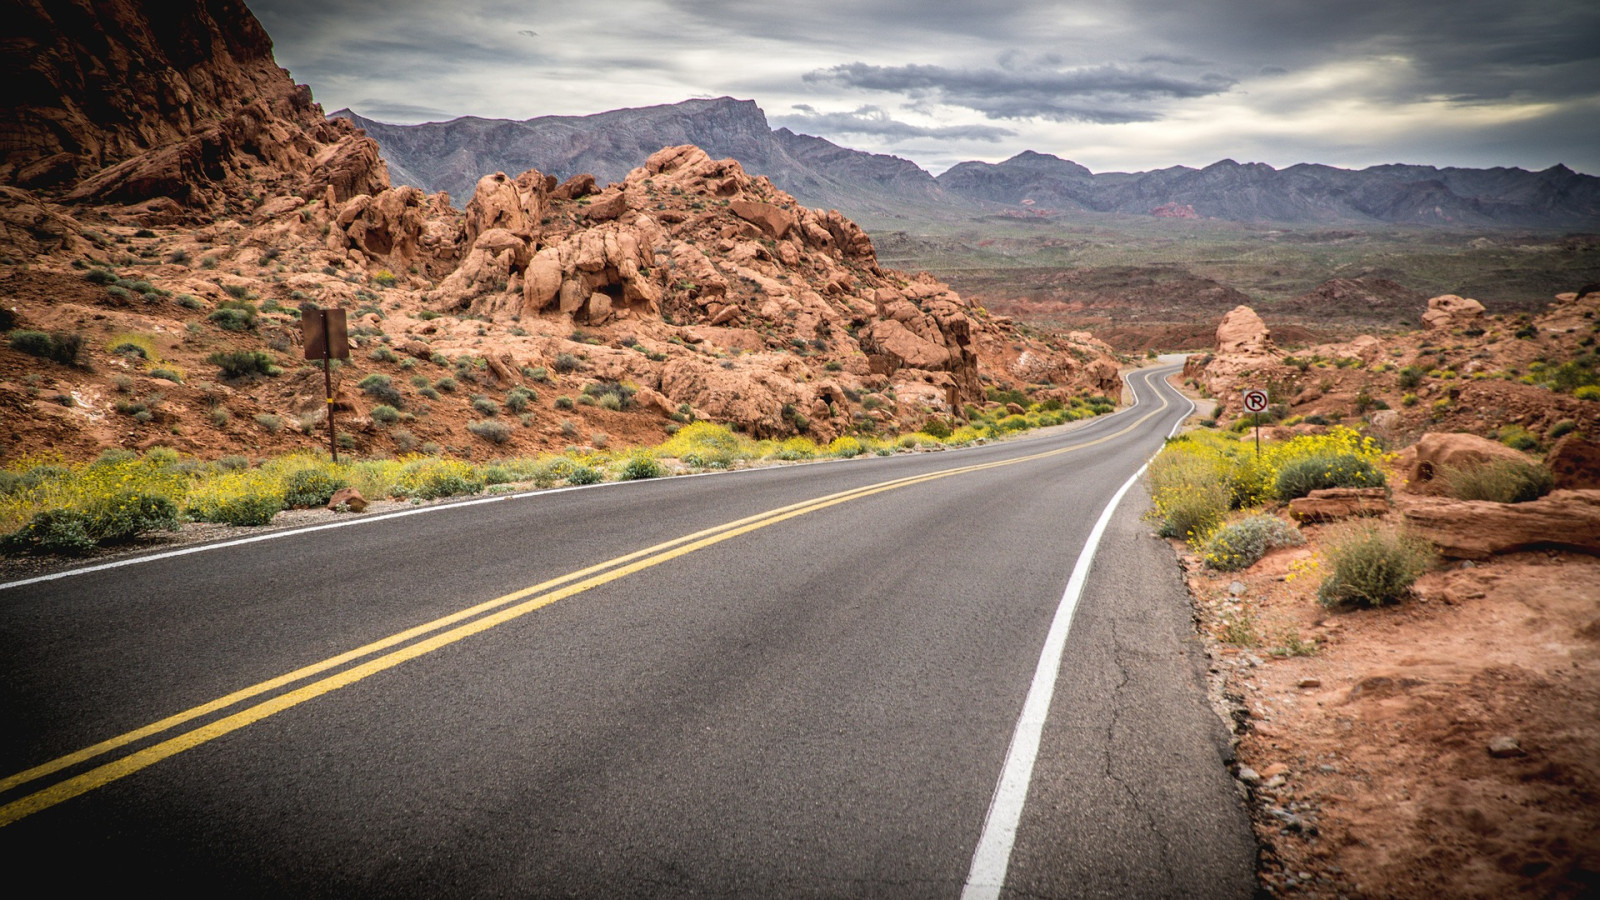 Valley of fire state park in Amerika